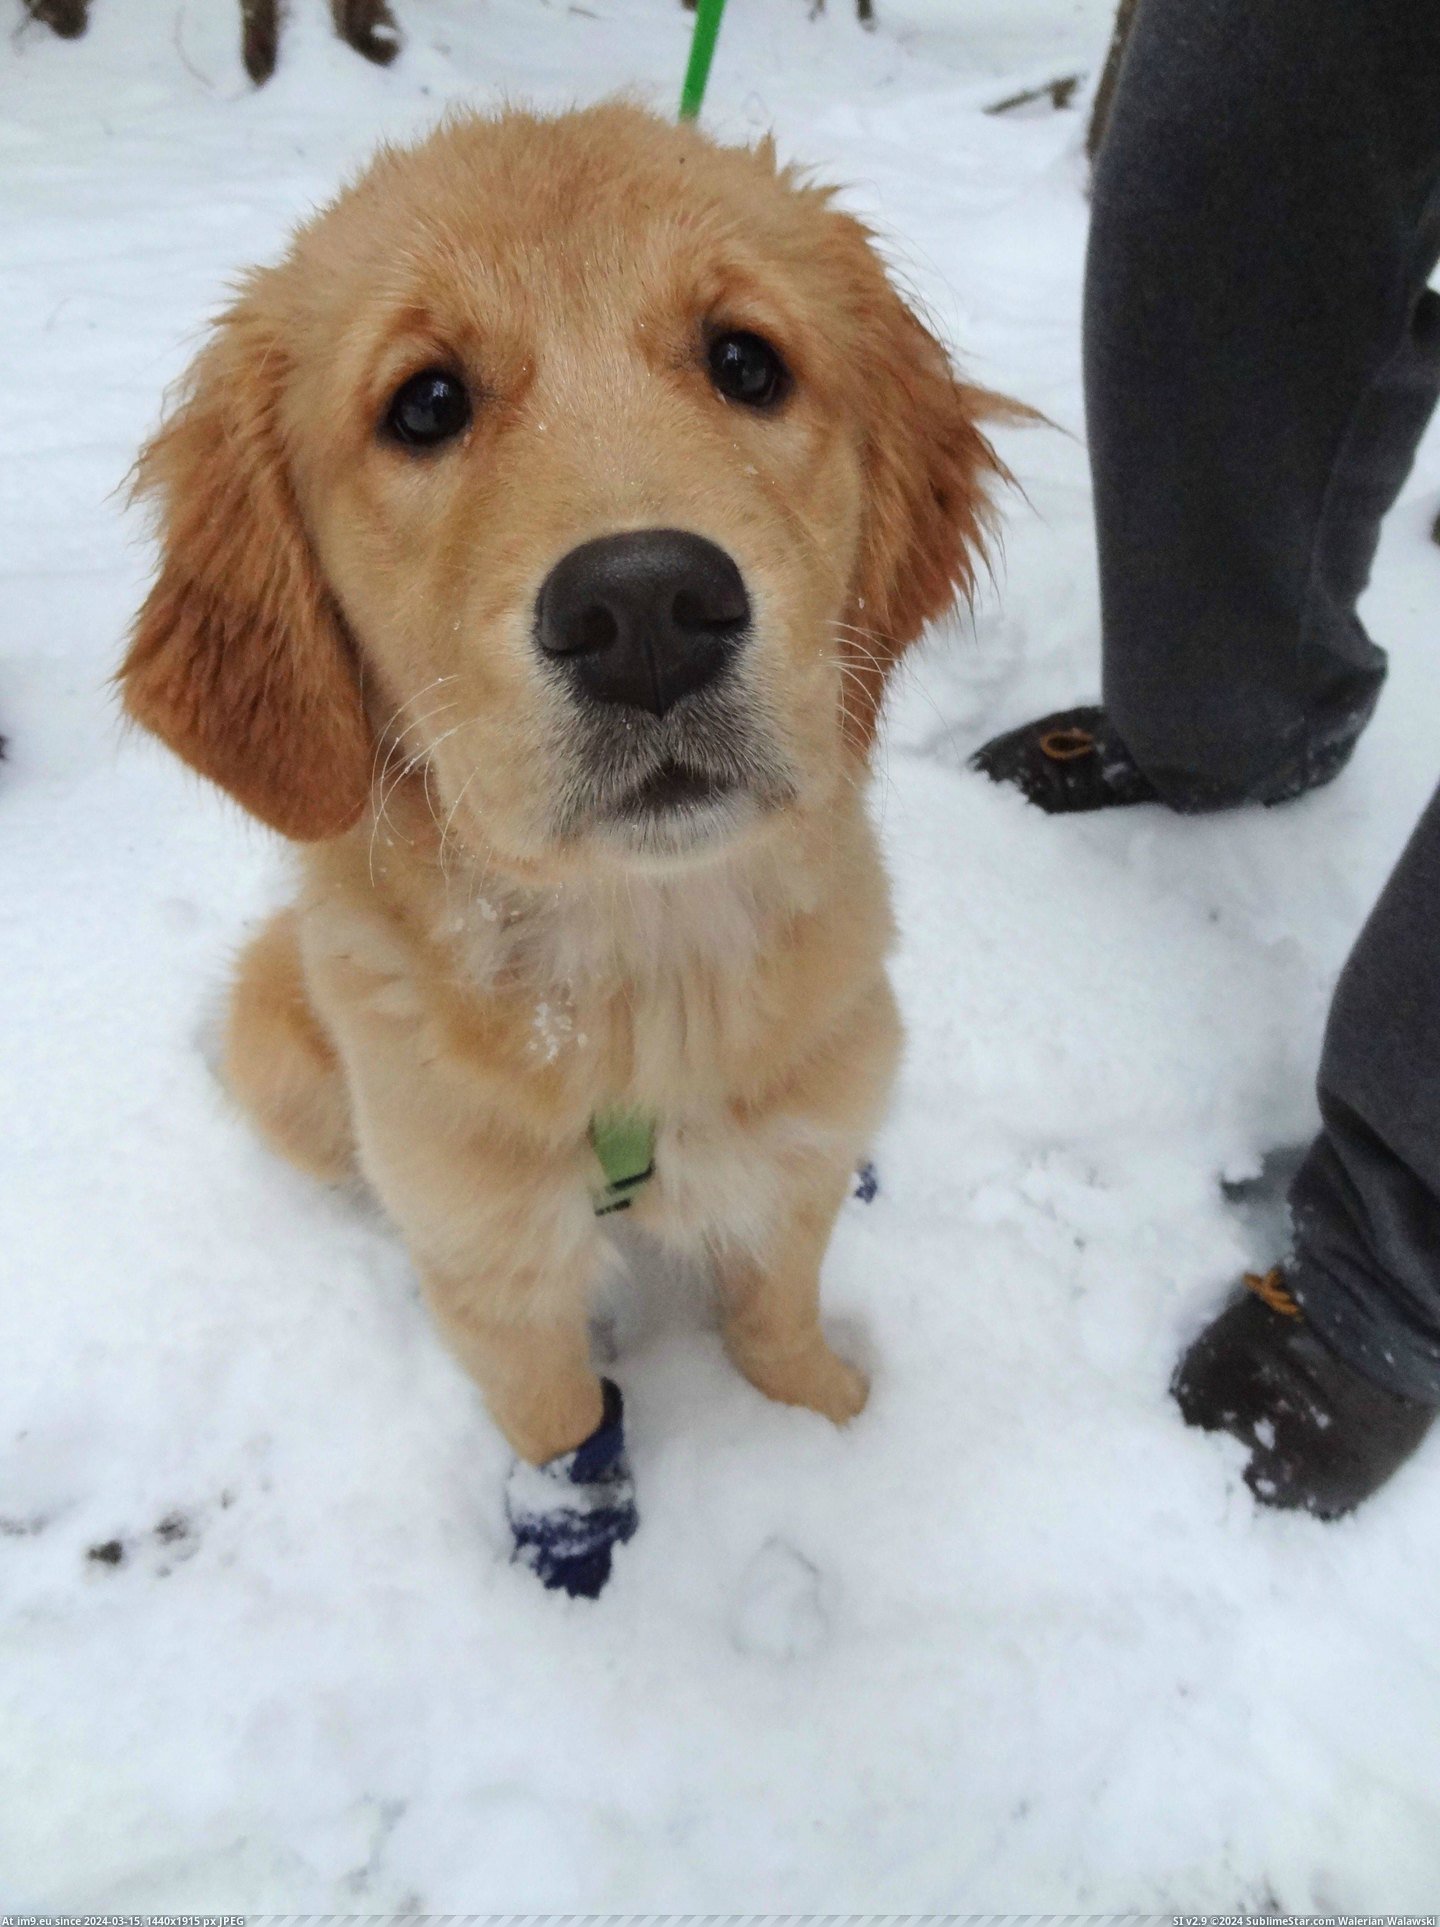 #One #Old #Eyes #Golden #Month #Walk #Booties #Snow #Our #Lost [Aww] My four-month-old Golden lost one of her booties on our walk in the snow. Those eyes! Pic. (Изображение из альбом My r/AWW favs))